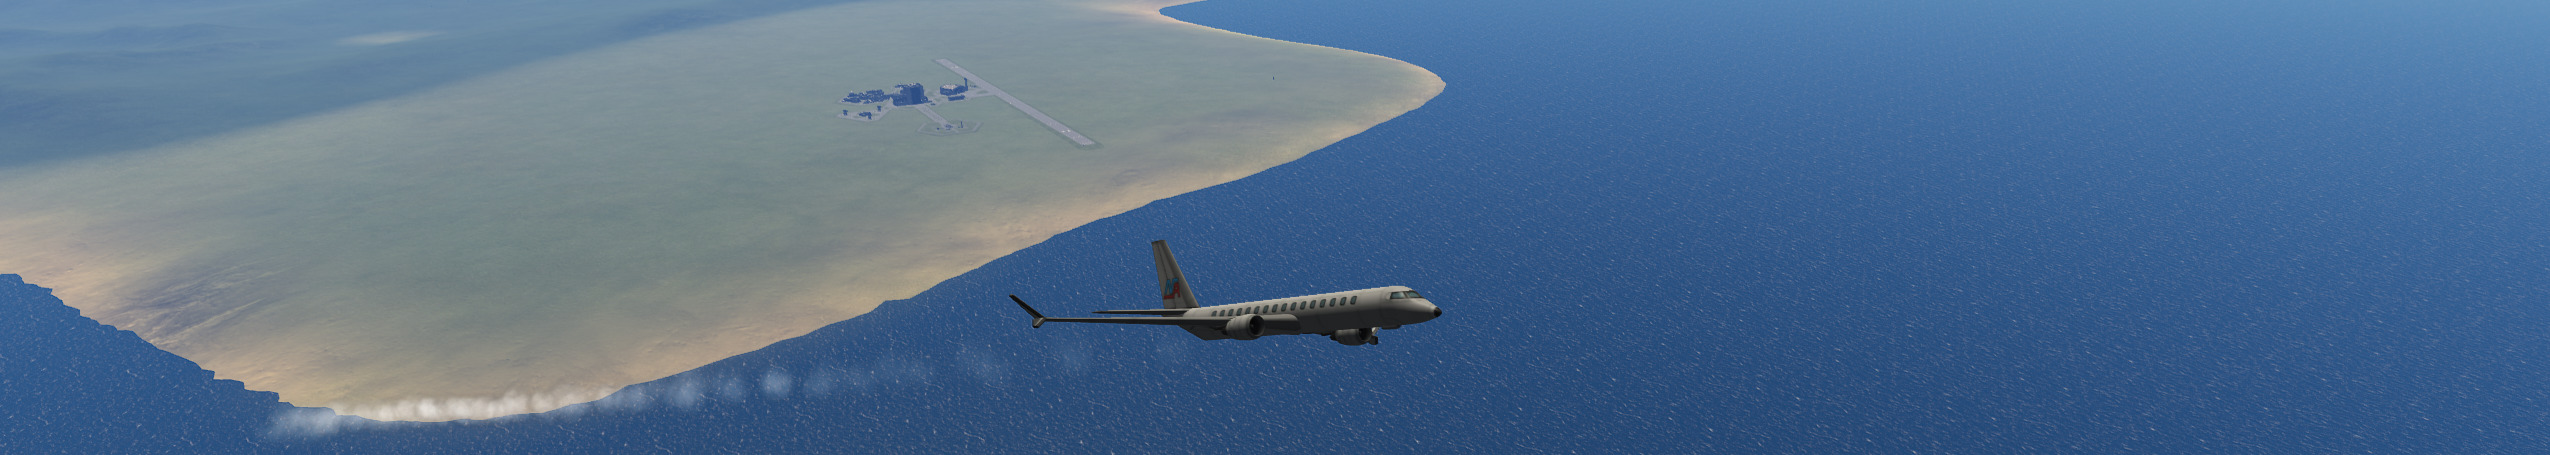 NA-9 over the KSC